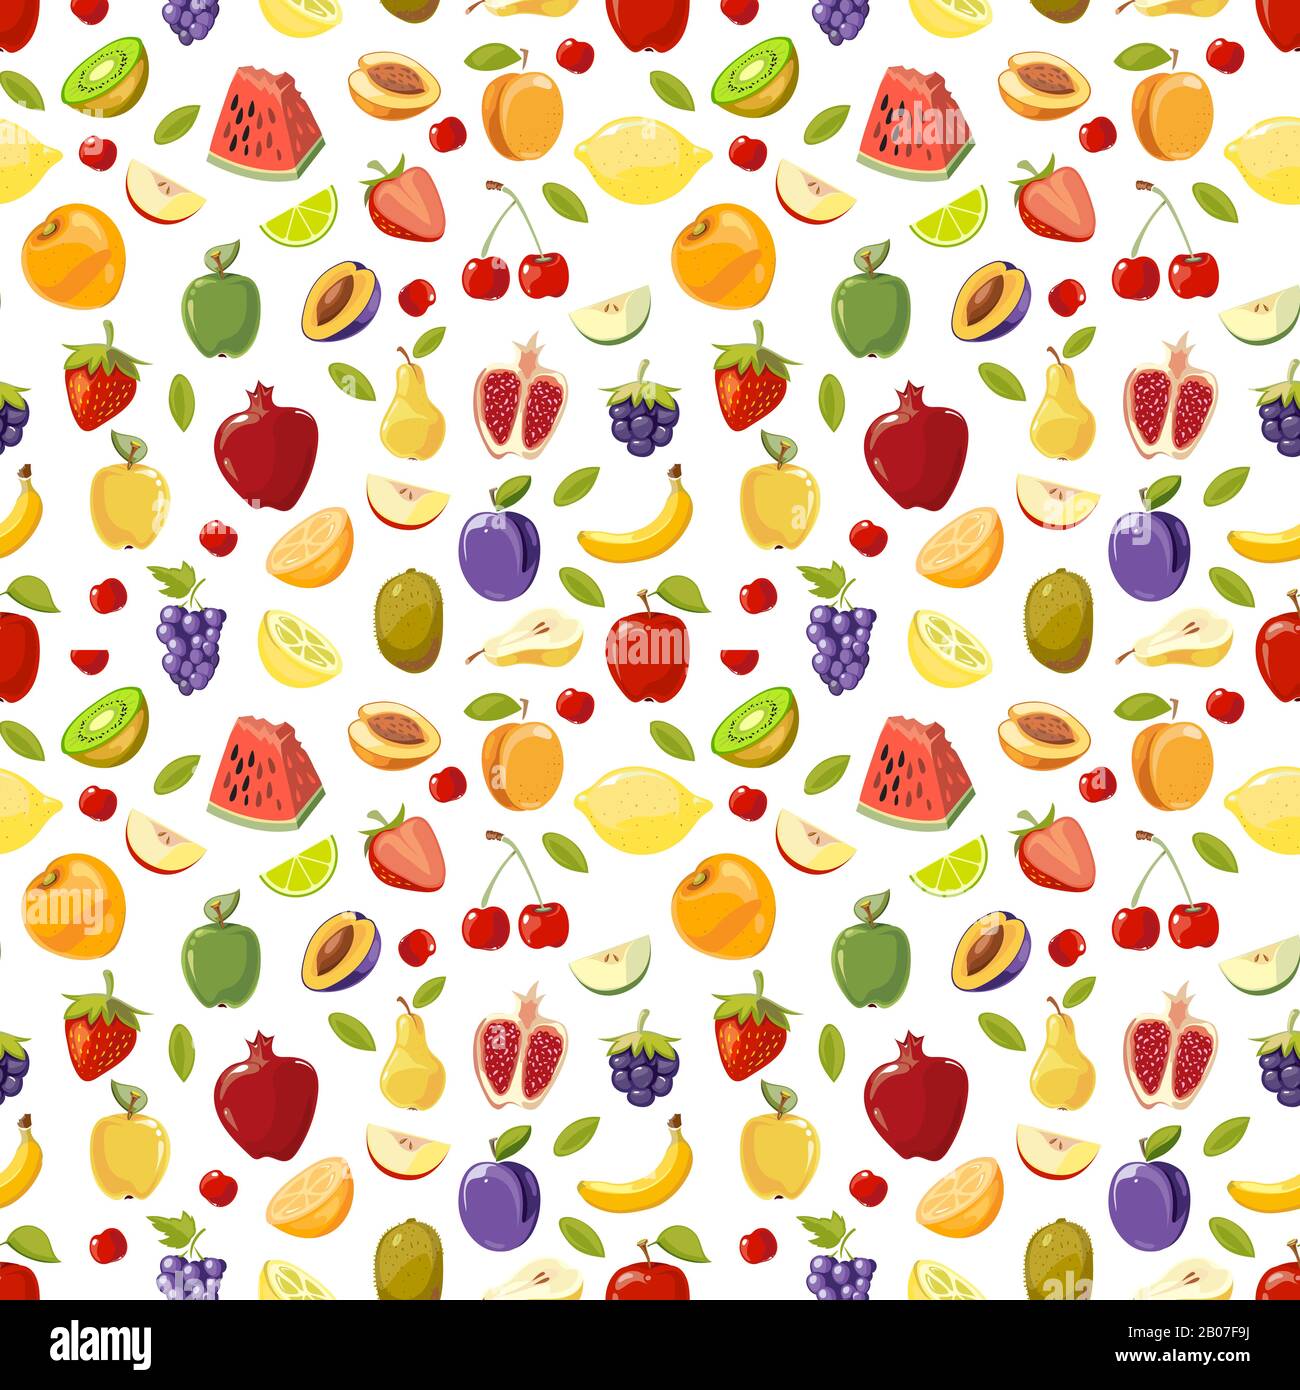 Miscellaneous vector fruits seamless pattern. Watermelon pomegranate pear and plum illustration Stock Vector